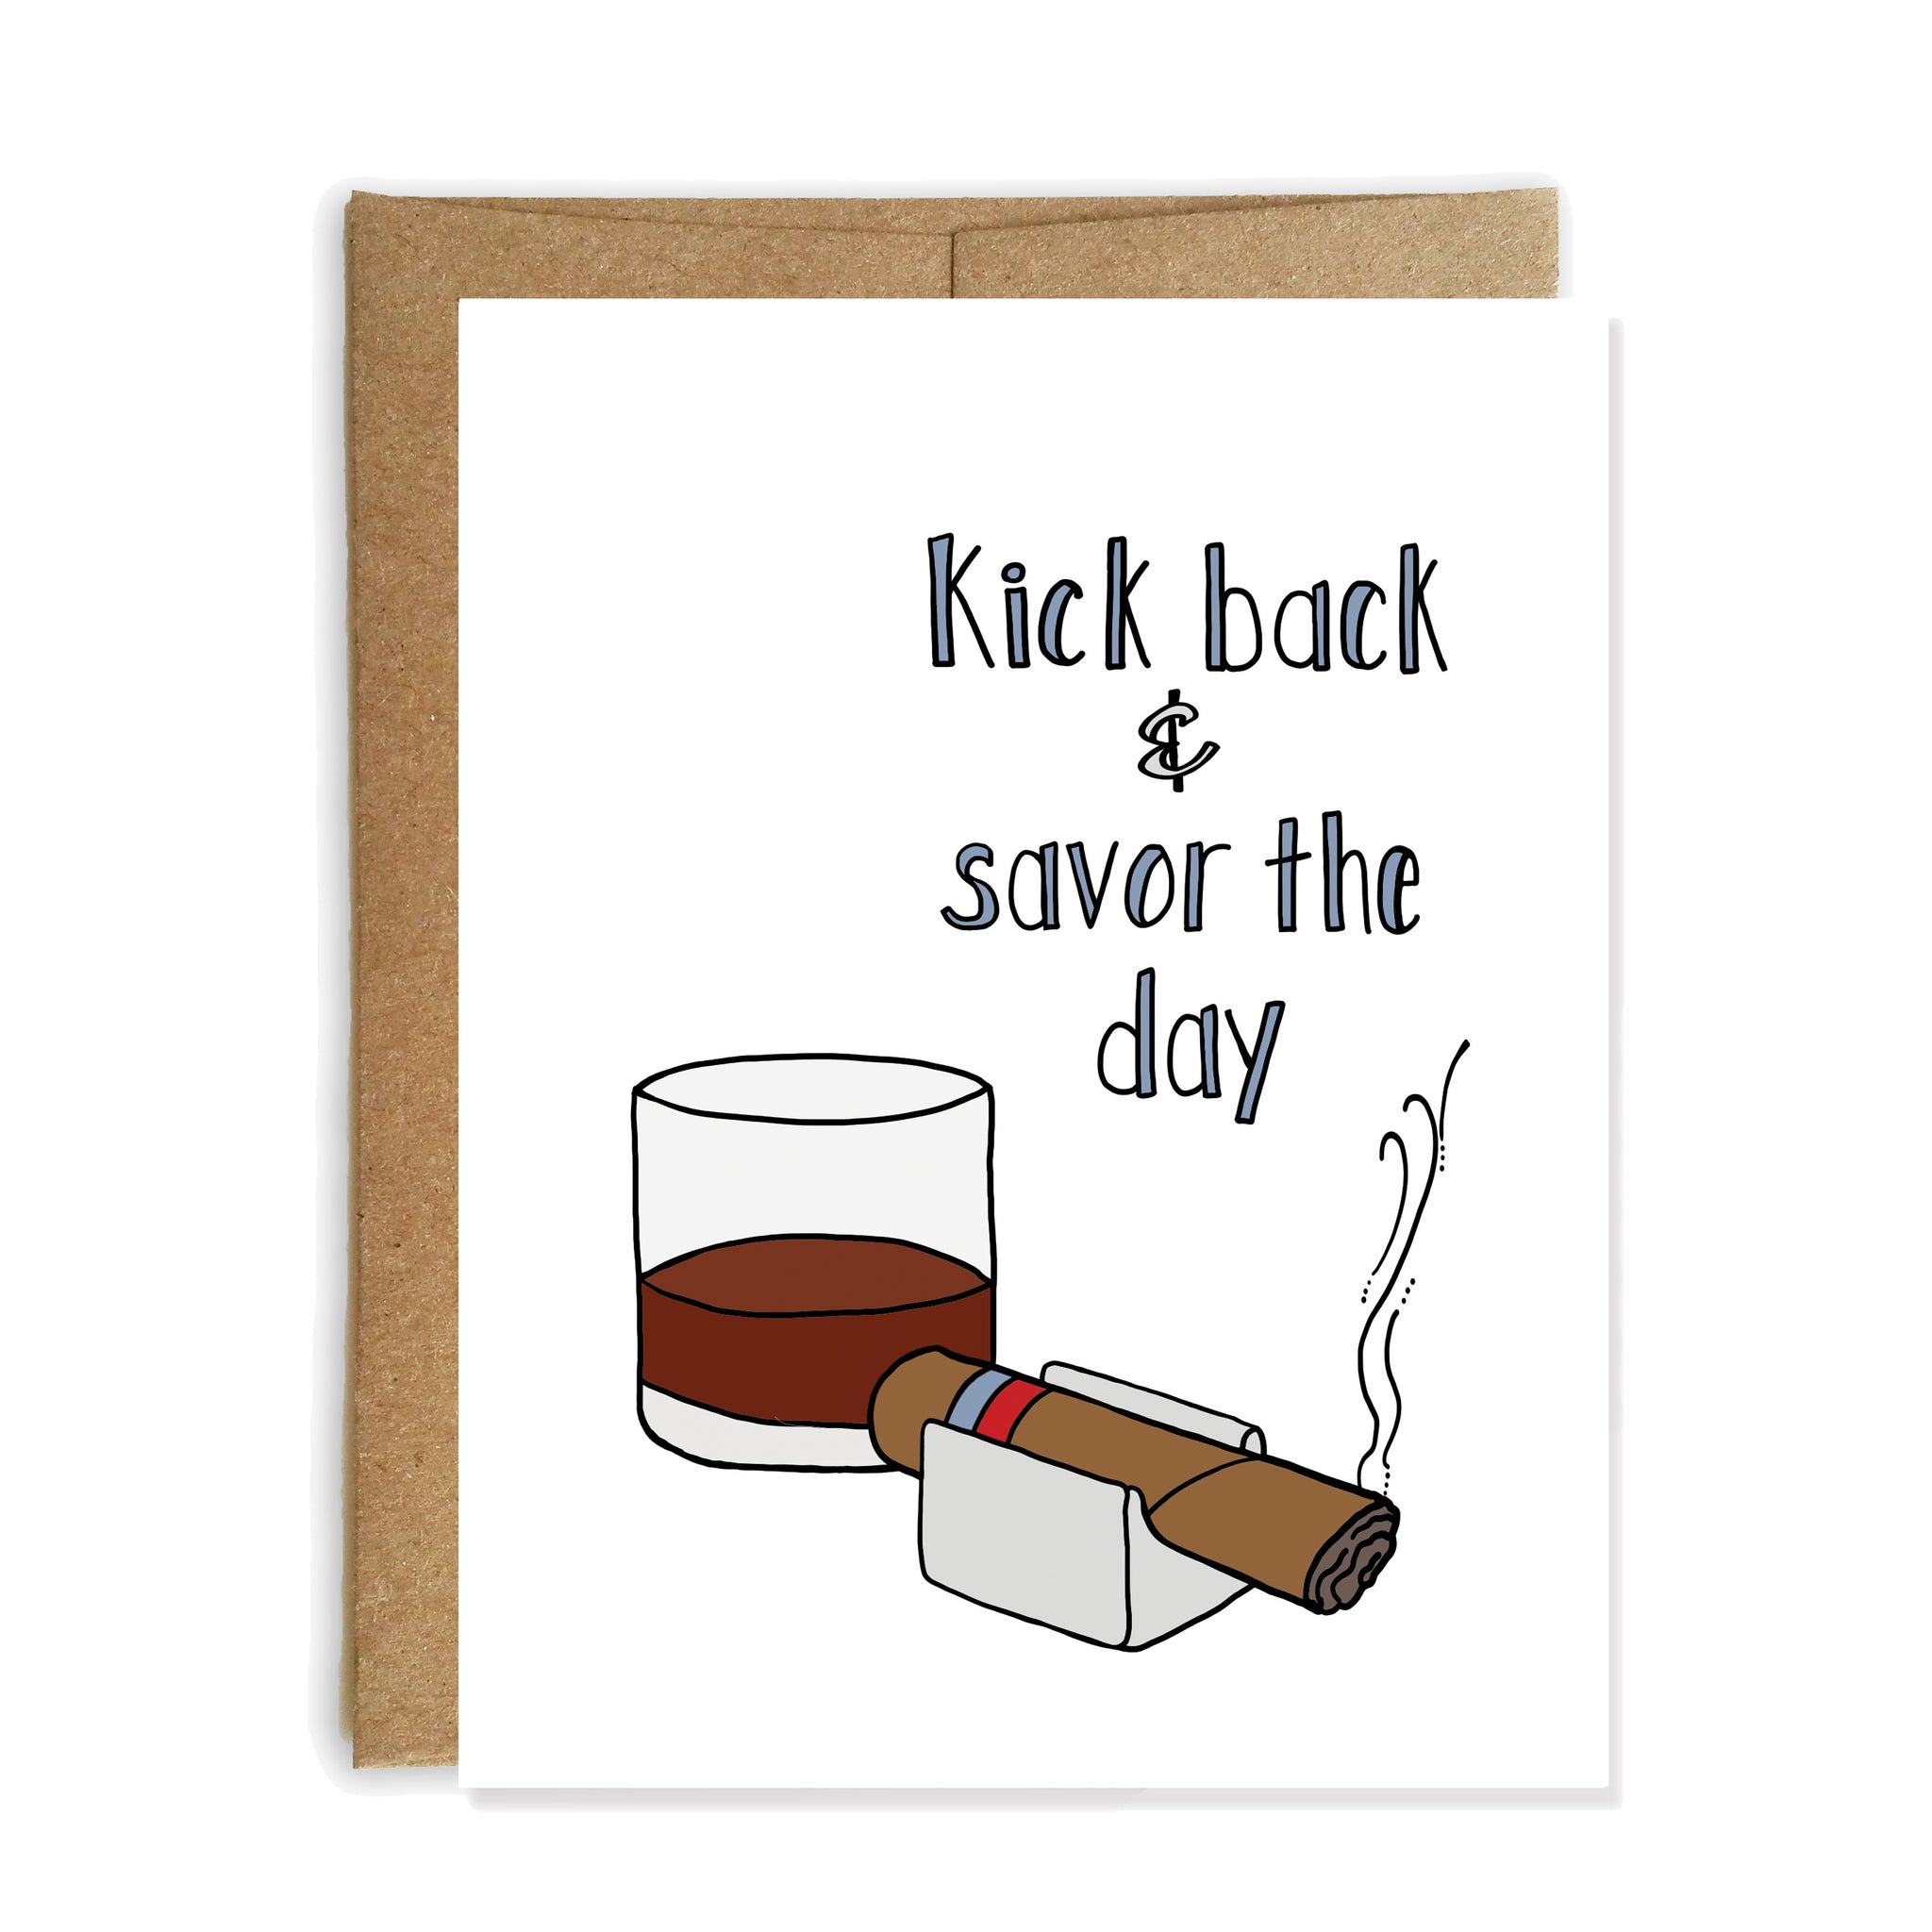 Savor the Day, Father's Day Card